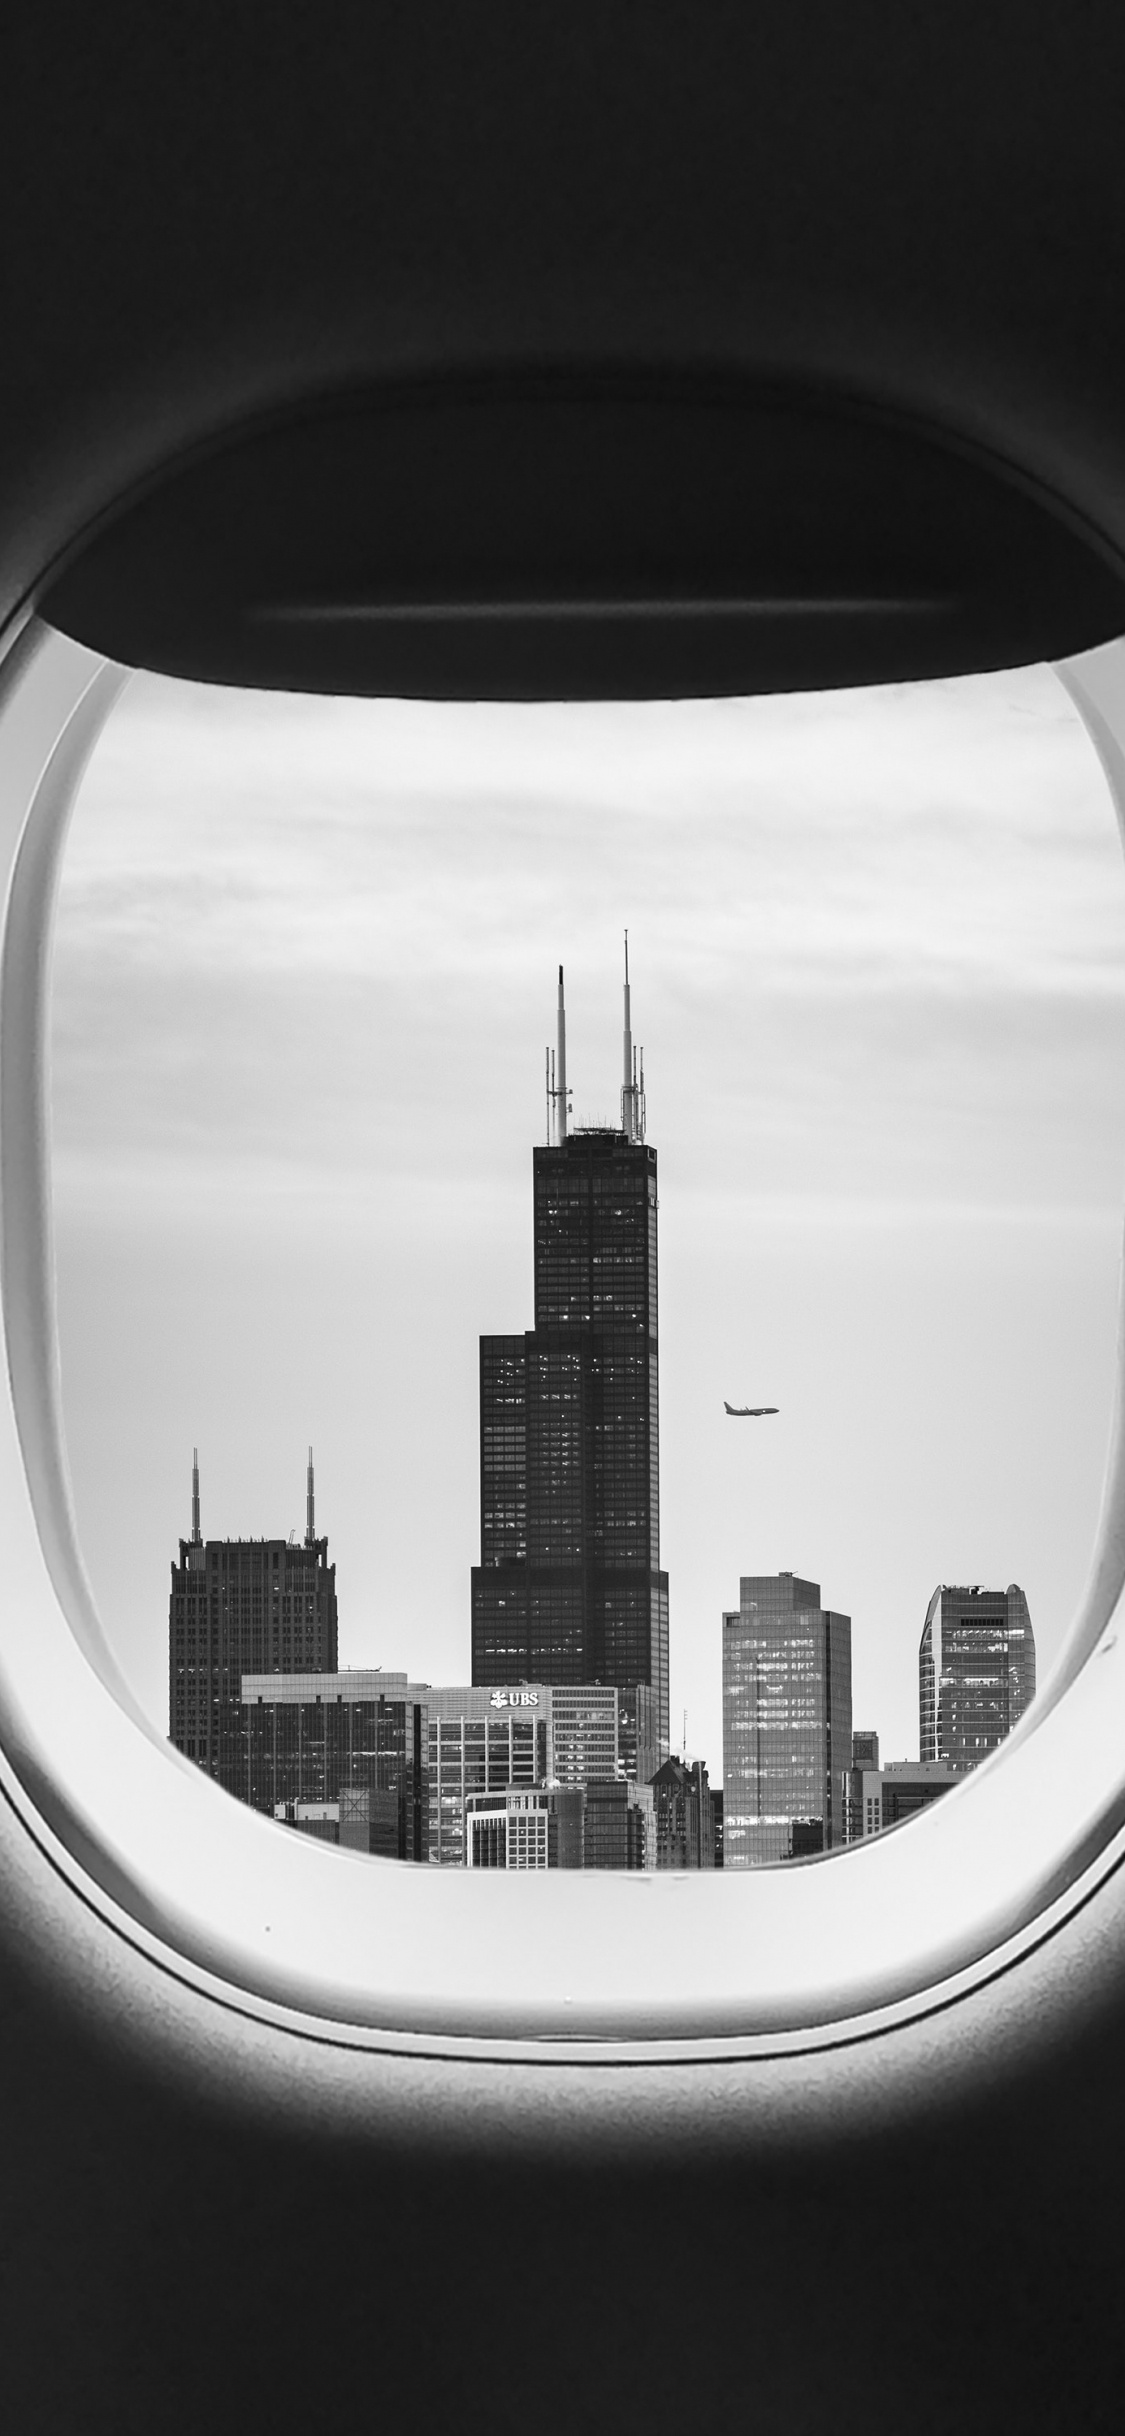 Airplane Window View of City Buildings During Daytime. Wallpaper in 1125x2436 Resolution